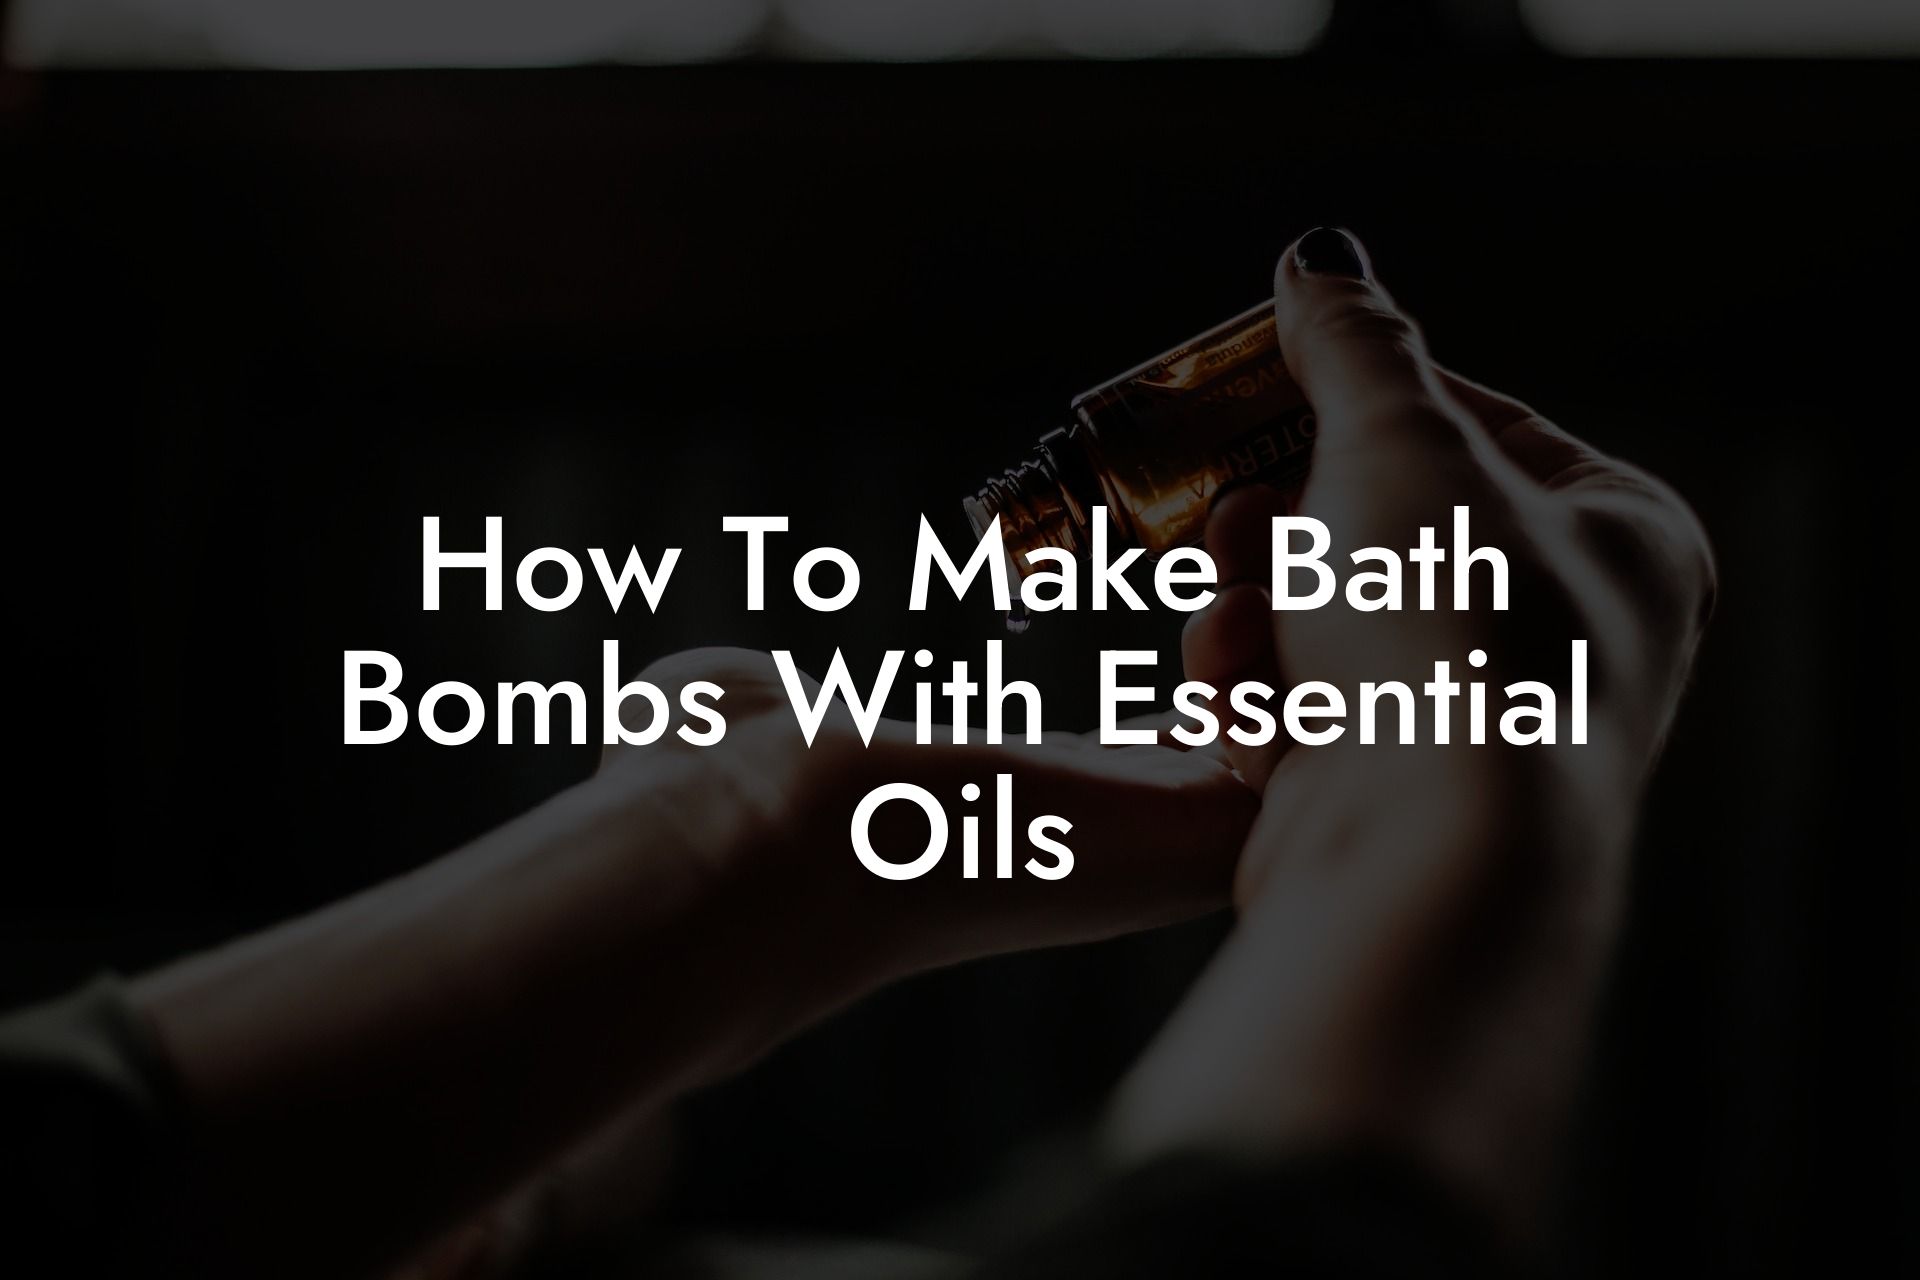 How To Make Bath Bombs With Essential Oils